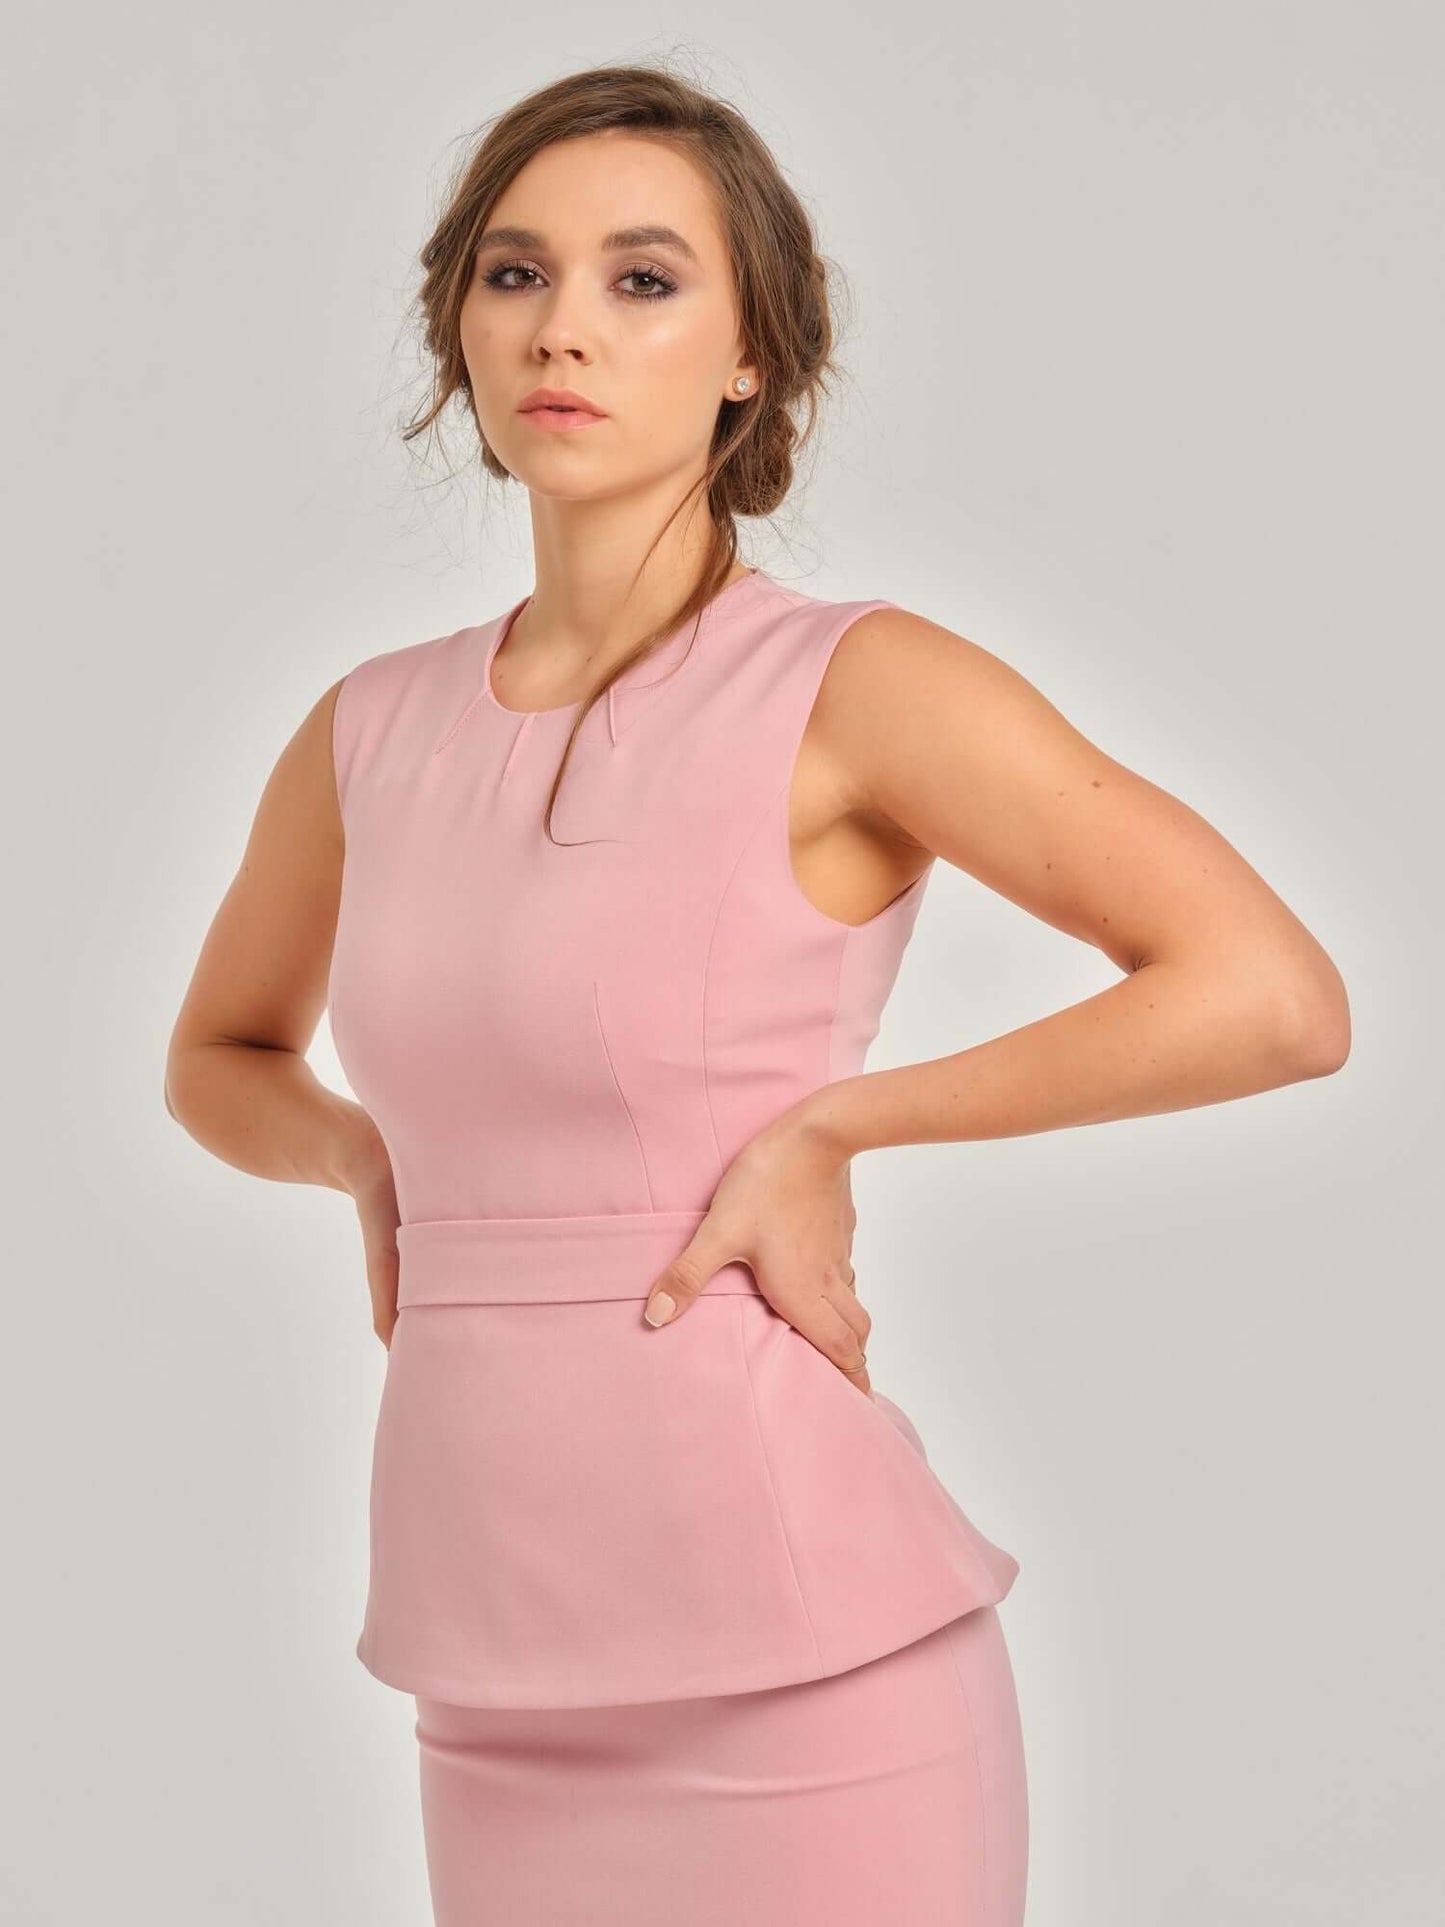 Cotton Candy Sleeveless Waist-Fitted Top by Tia Dorraine Women's Luxury Fashion Designer Clothing Brand